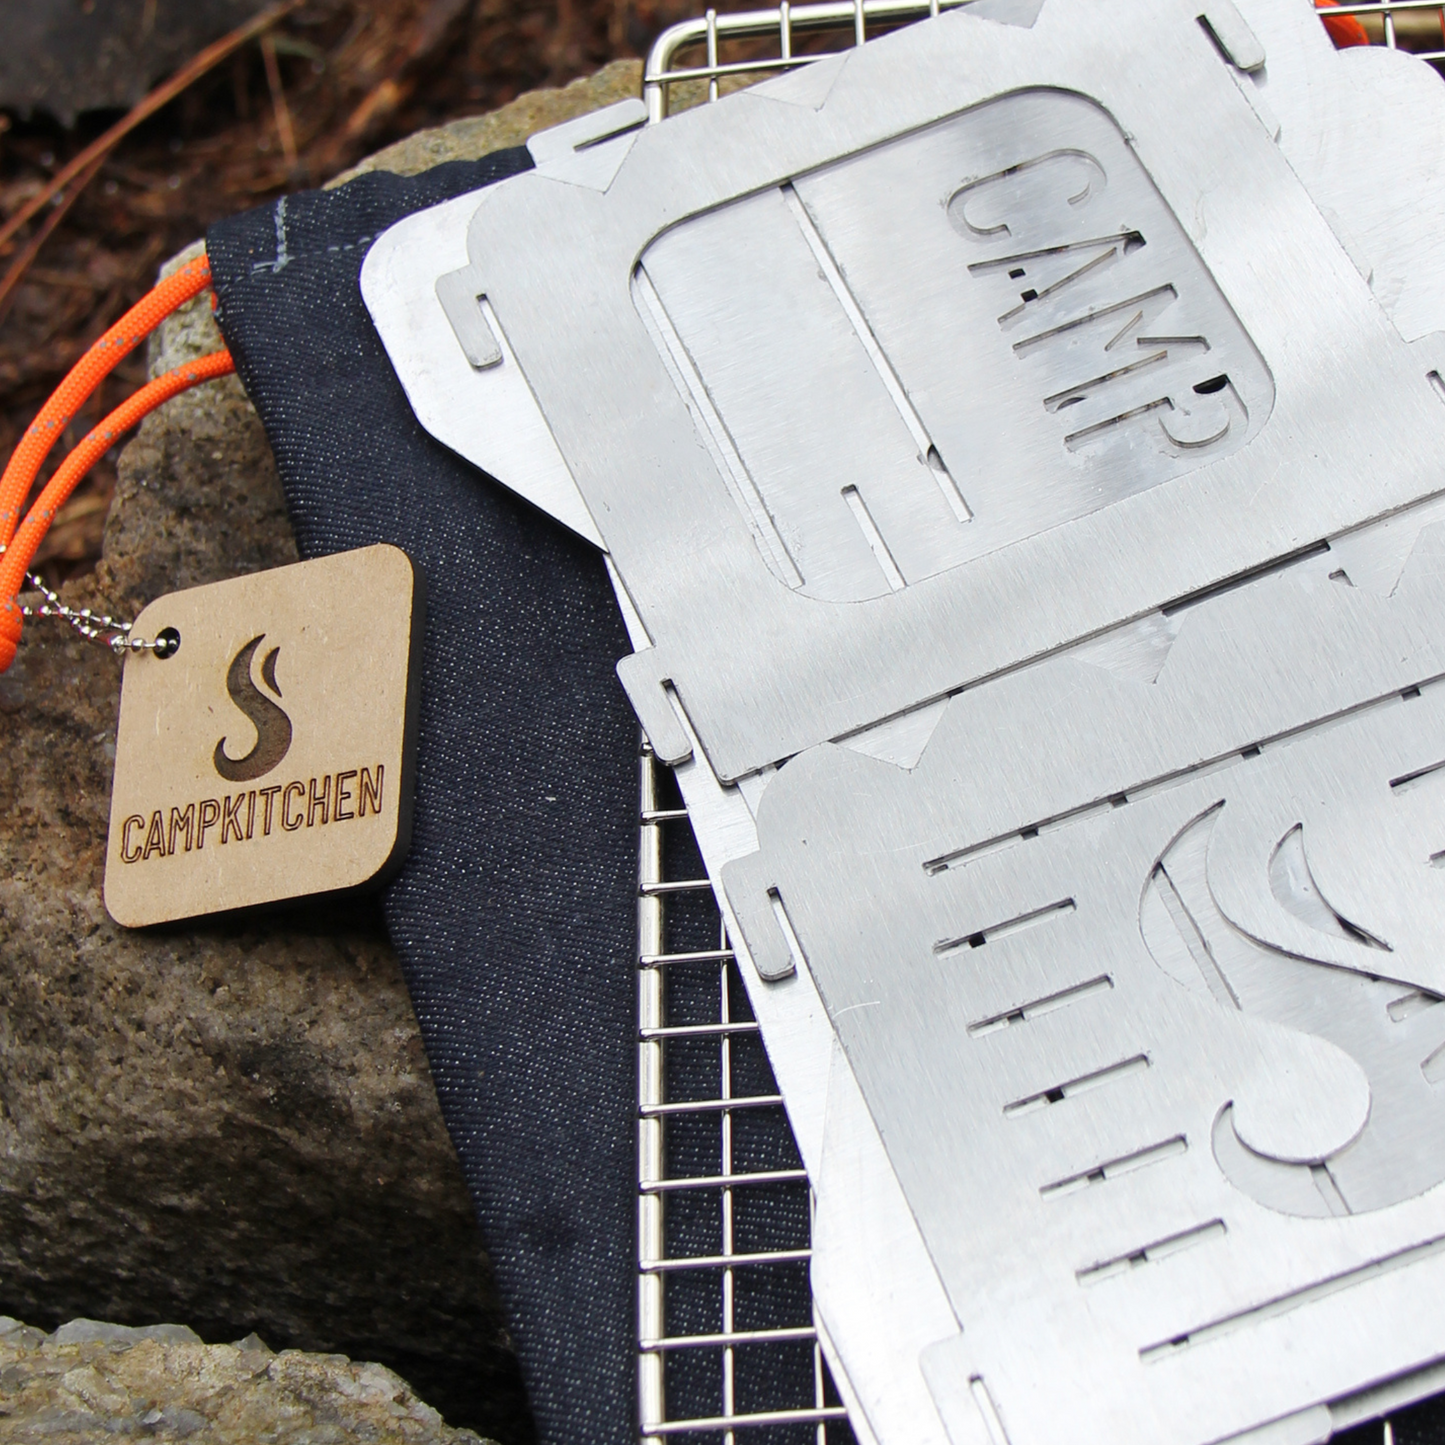 CAMPKITCHEN Twig Stove panels laid flat on top of the hand stitched denim bag.